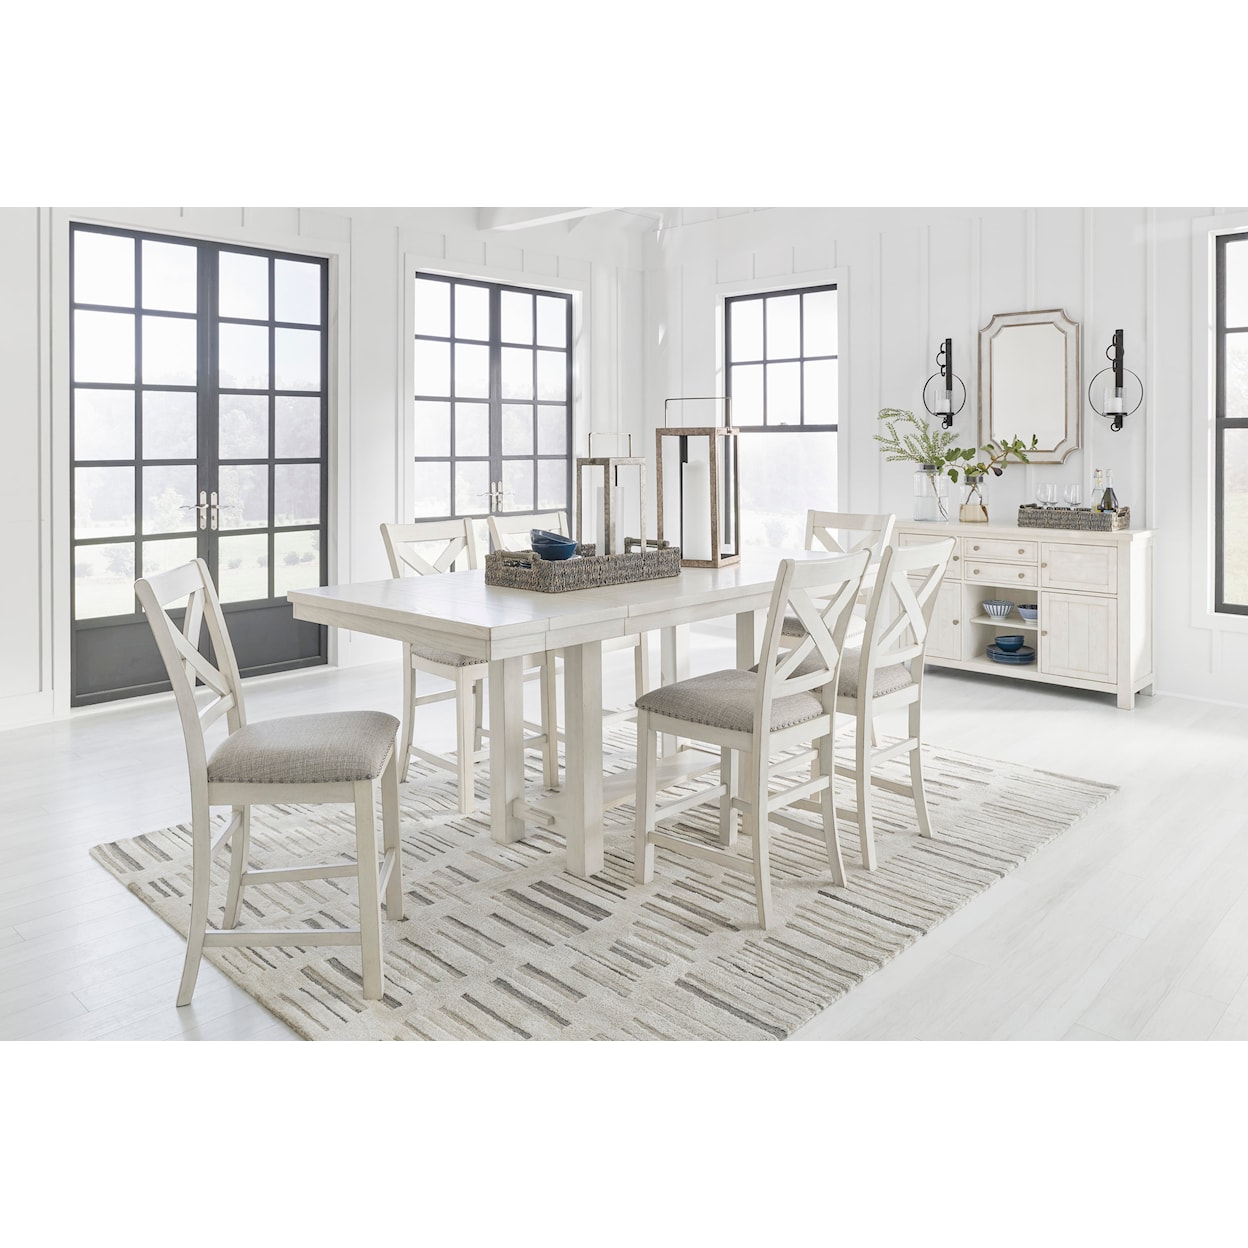 Benchcraft Robbinsdale Counter Dining Set